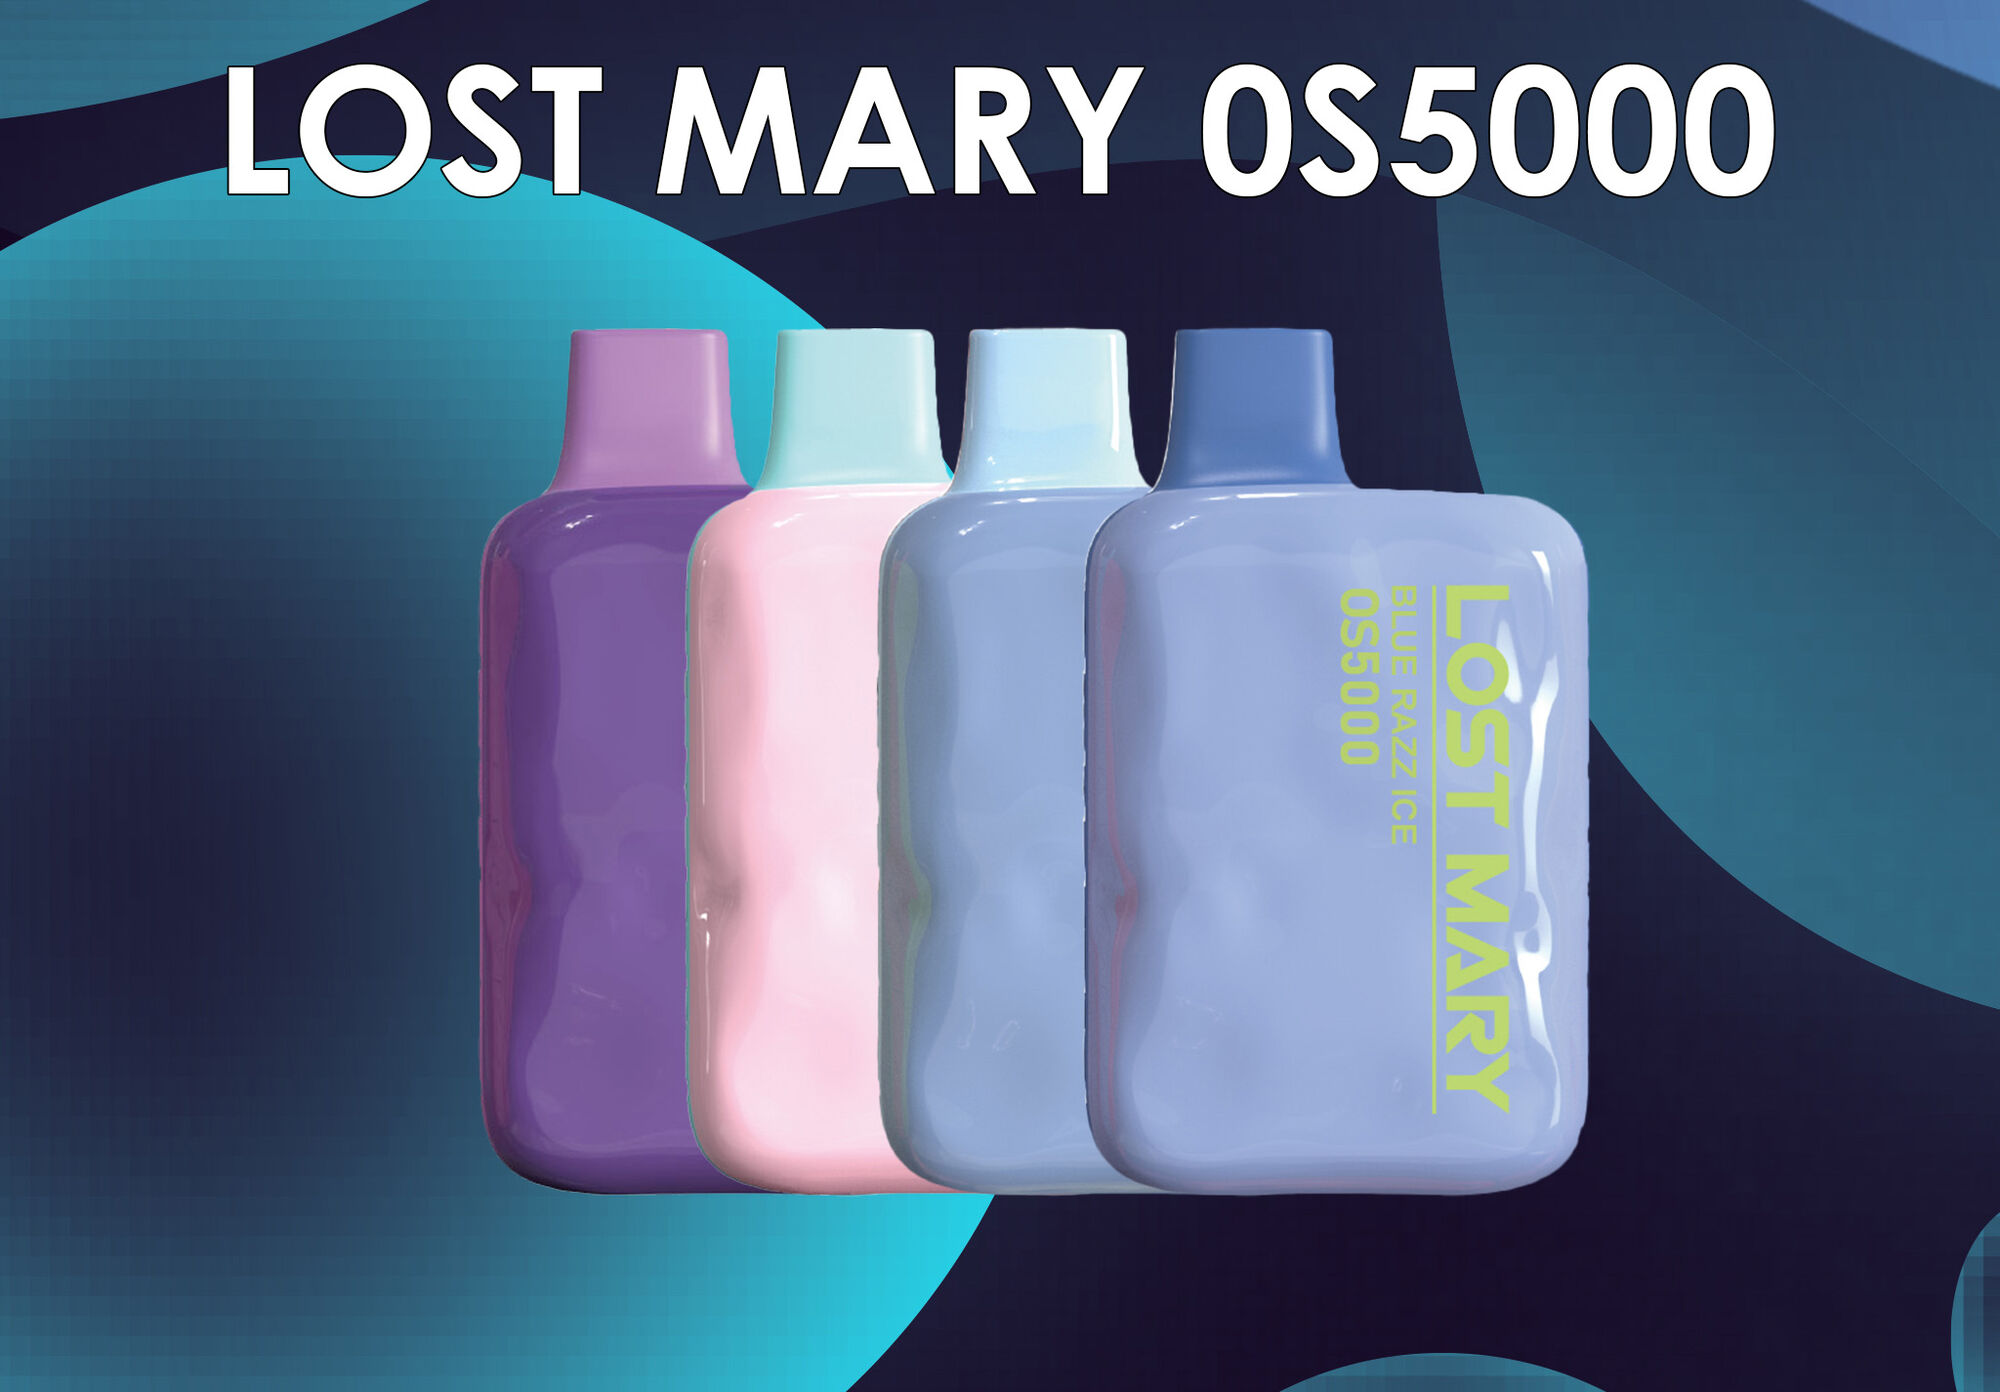 LOST MARY 055000 